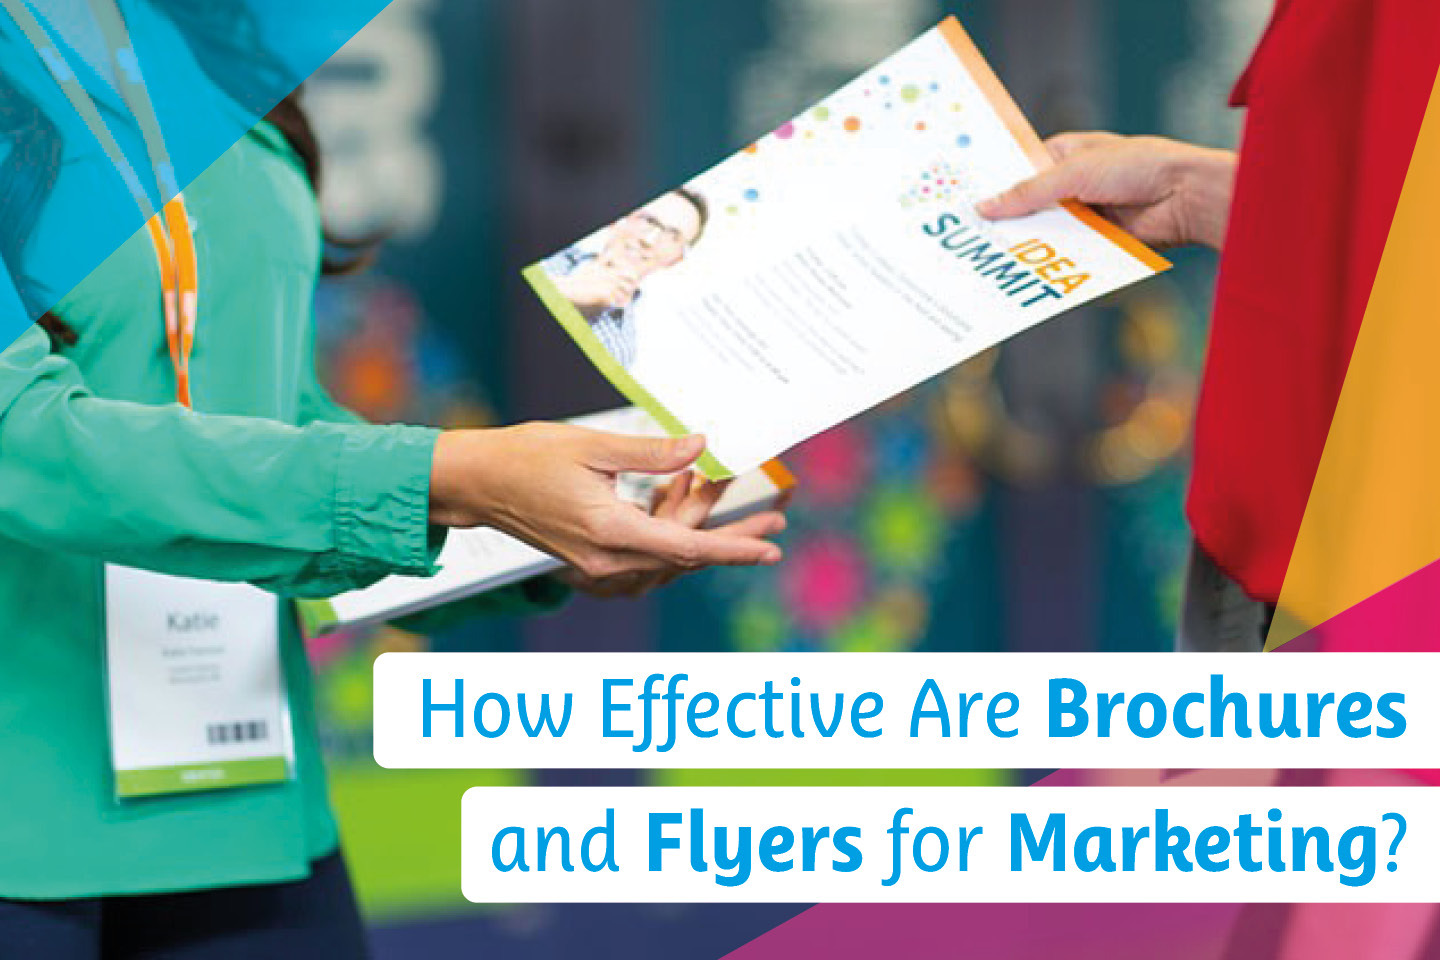 How Effective Are Brochures and Flyers for Marketing?